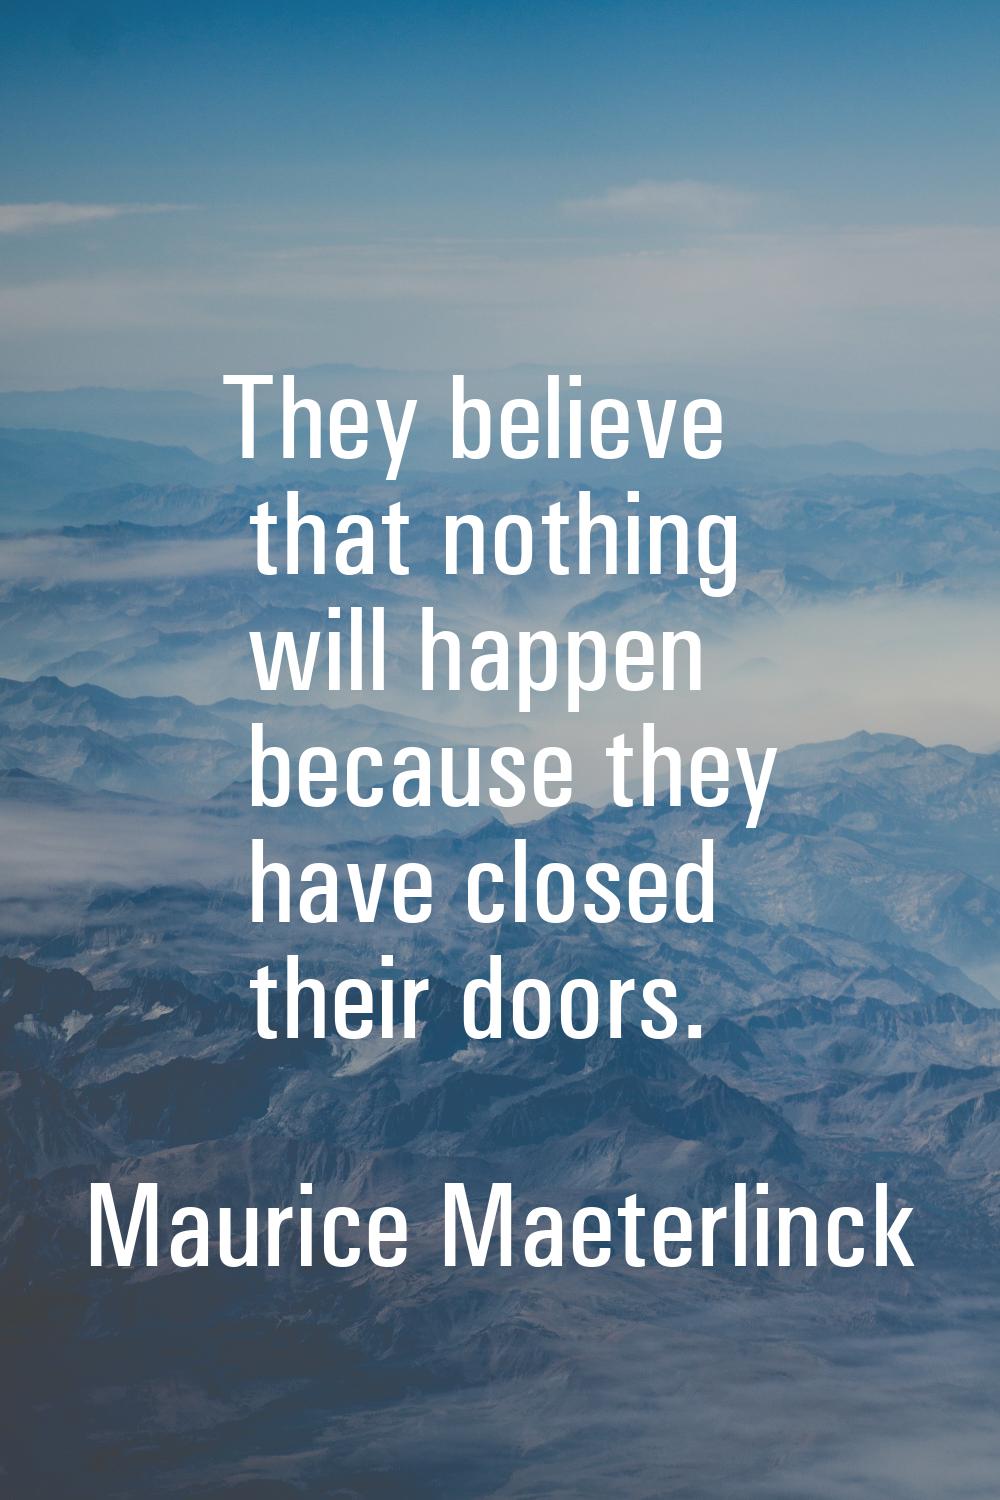 They believe that nothing will happen because they have closed their doors.